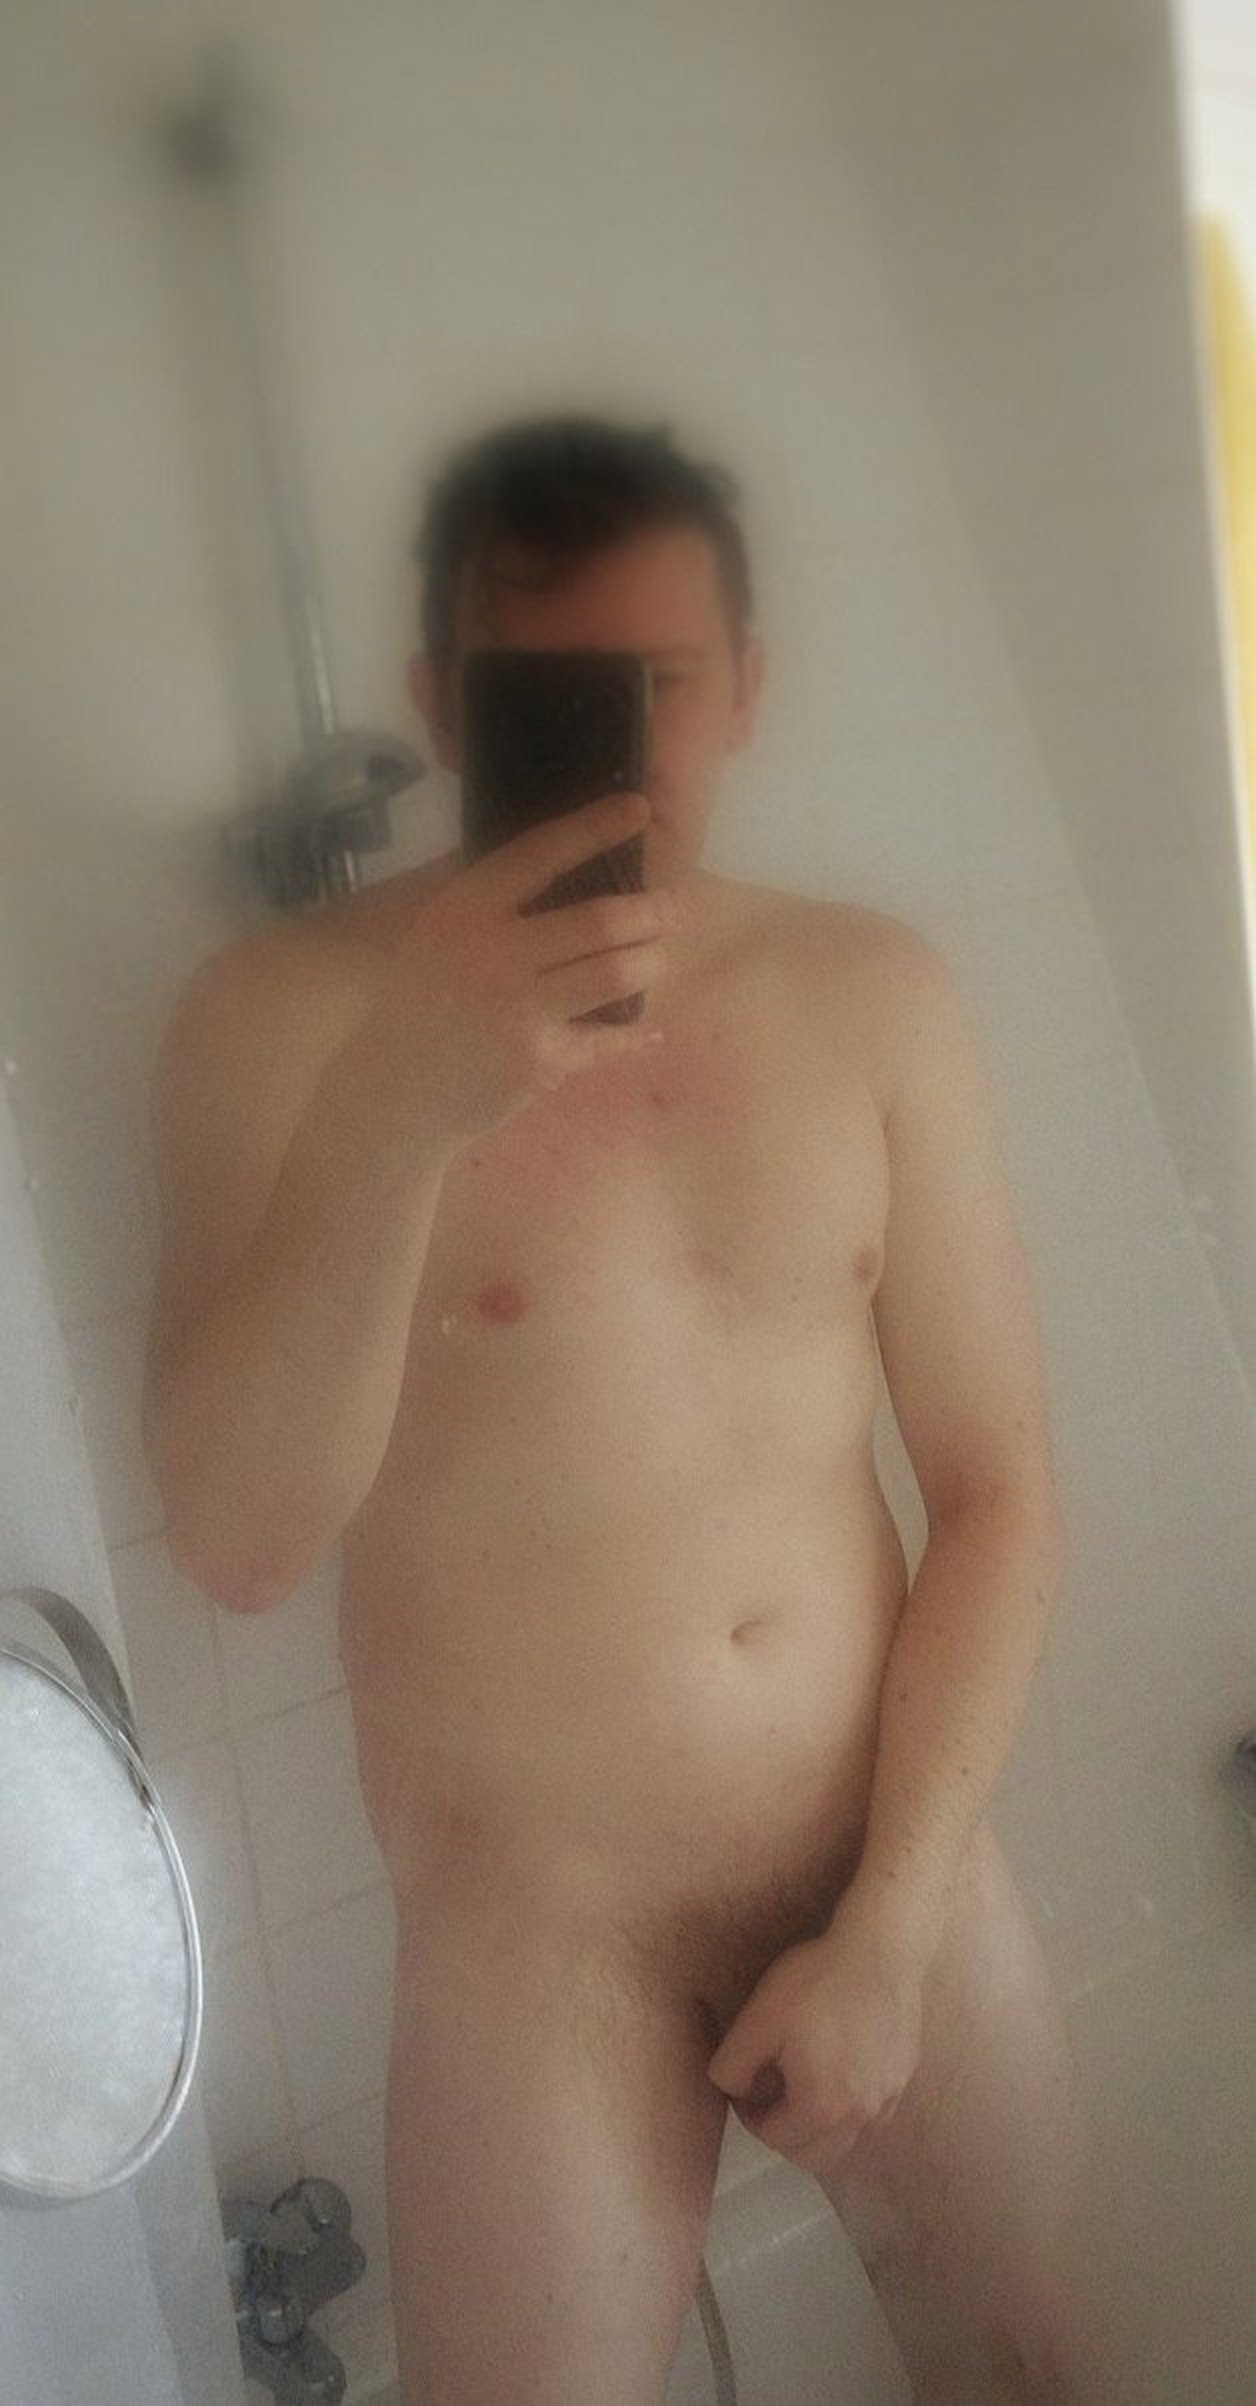 Watch the Photo by funguy5180 with the username @funguy5180, who is a verified user, posted on February 20, 2021. The post is about the topic Sexy Selfhot. and the text says 'Nude weekend-greetings from shower, share and follow for more

#funguy5180 #nude #selfie #mirror #shower #ass #dick #boy #guy #german #amateur #homemade #weekend #naughtyweekend'